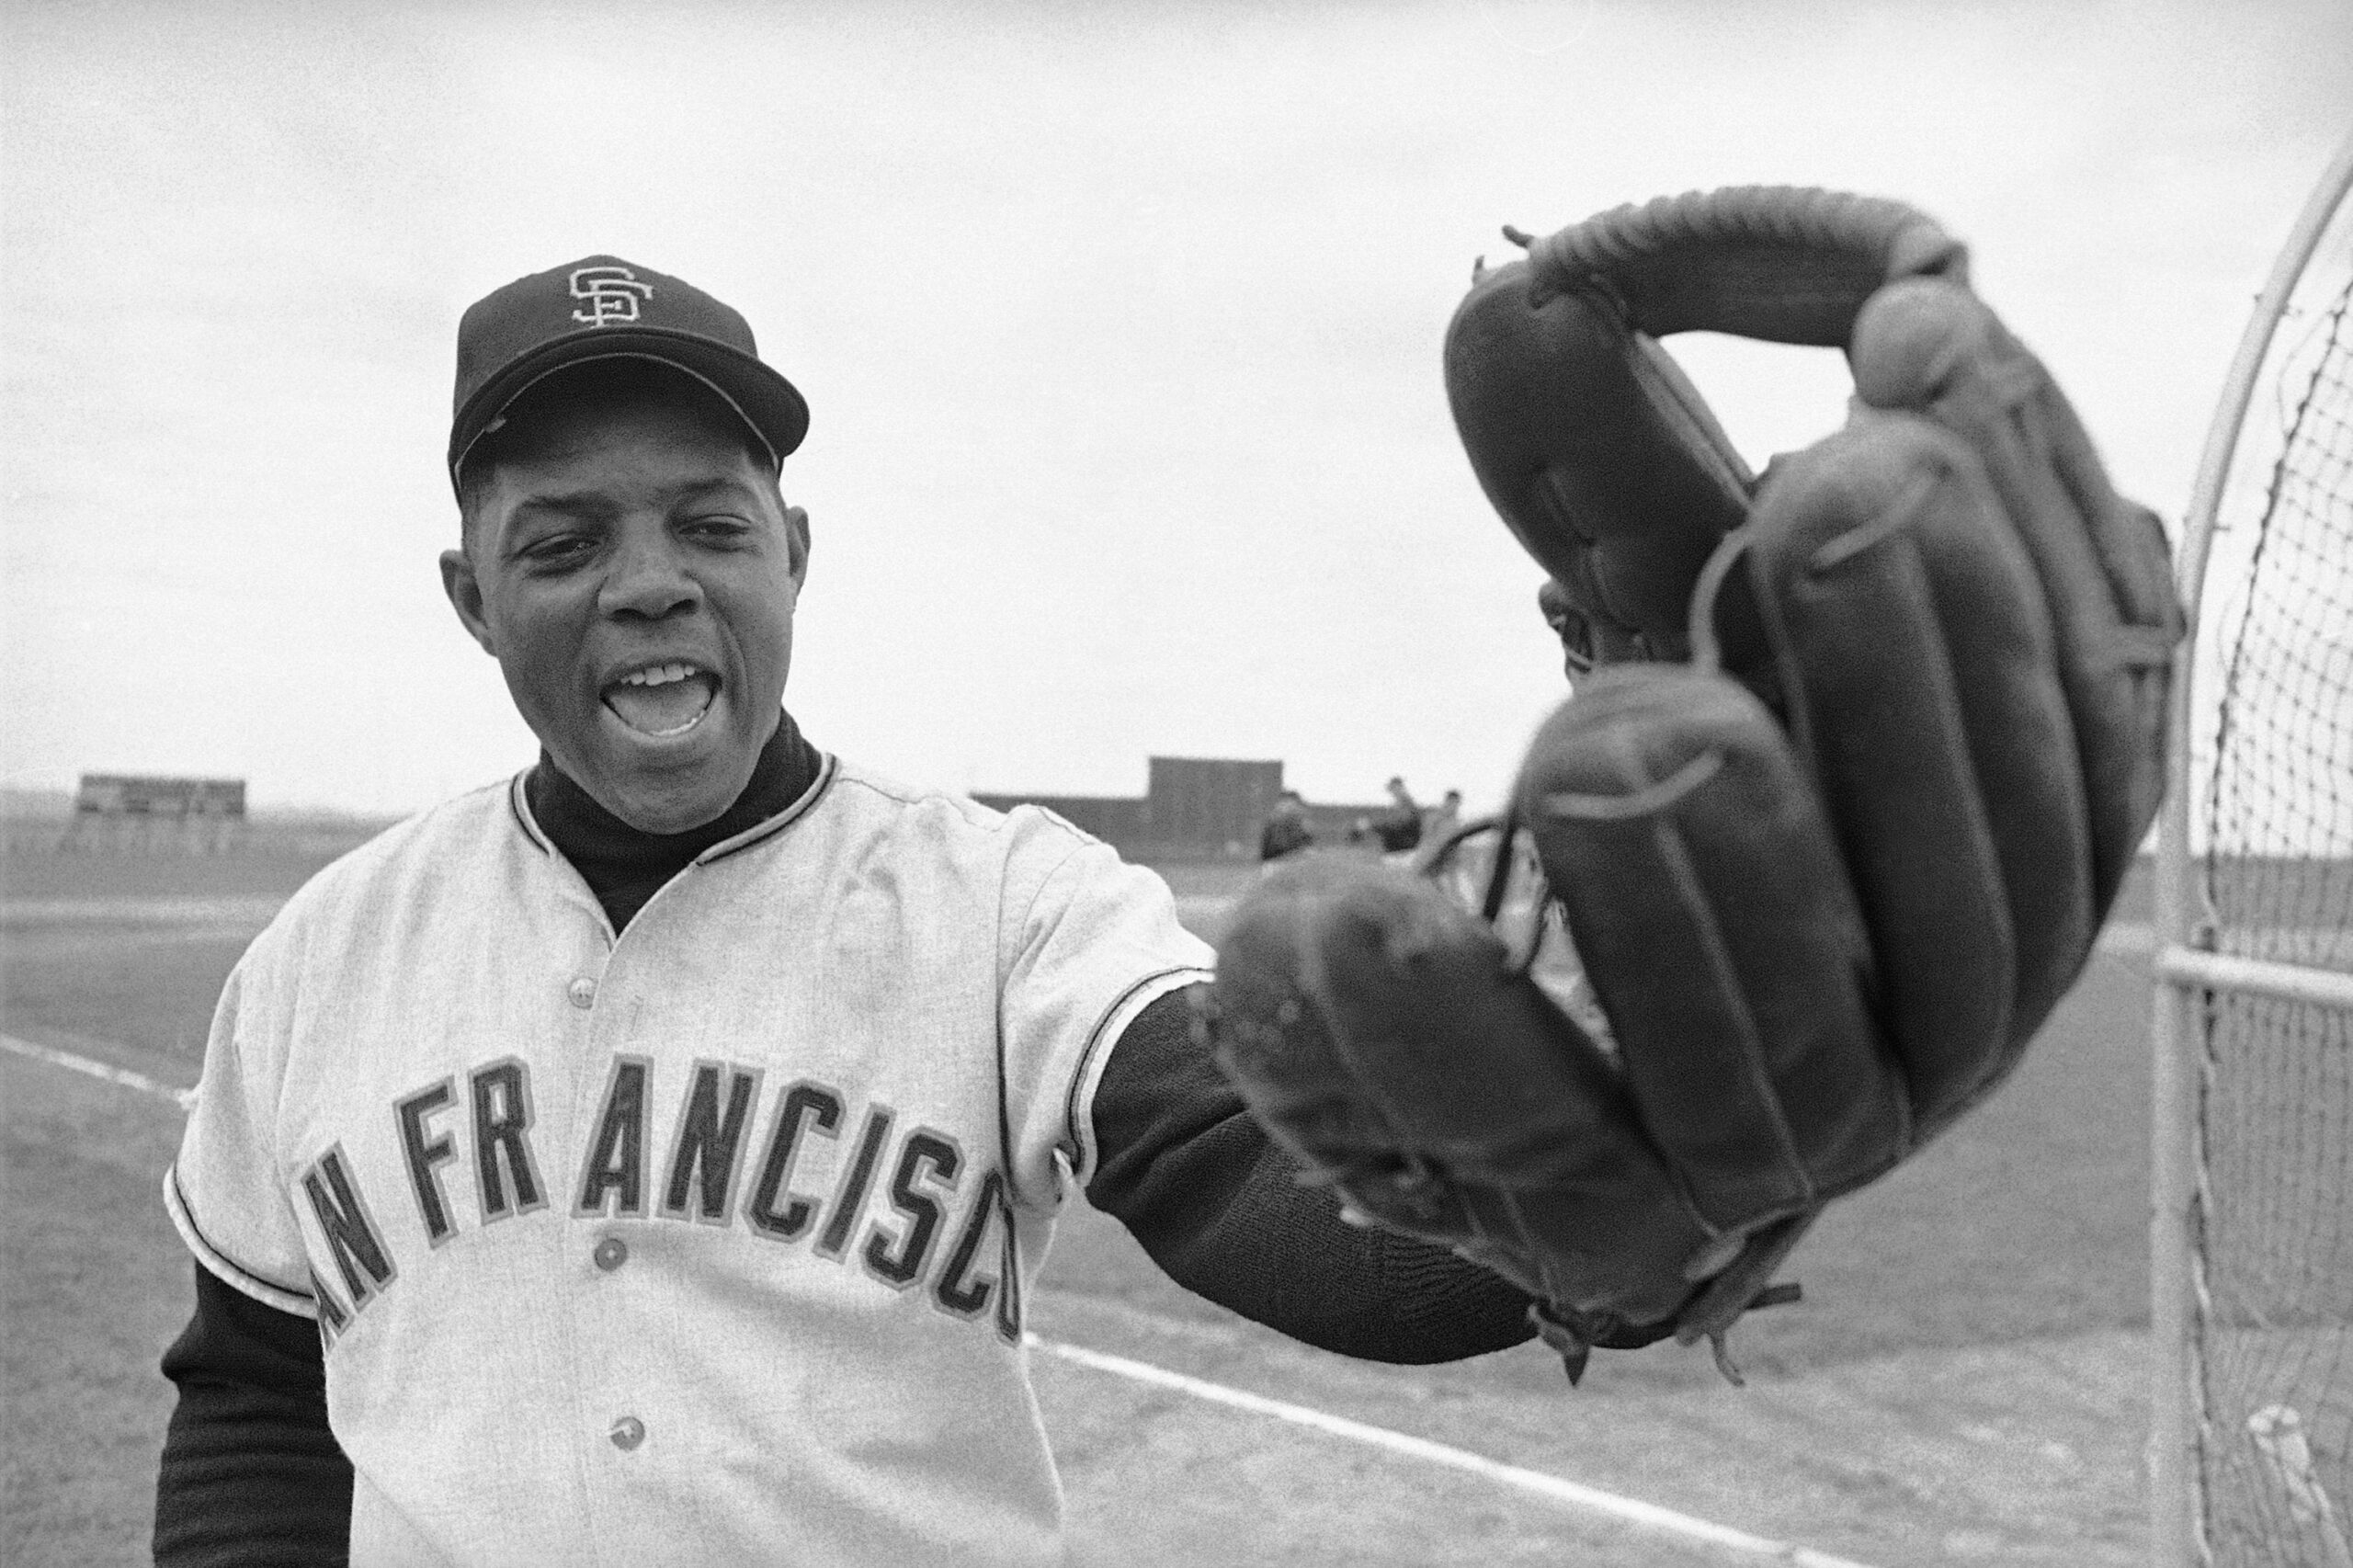 Baseball legend Willie Mays, all-around great of America’s pastime, dead at 93